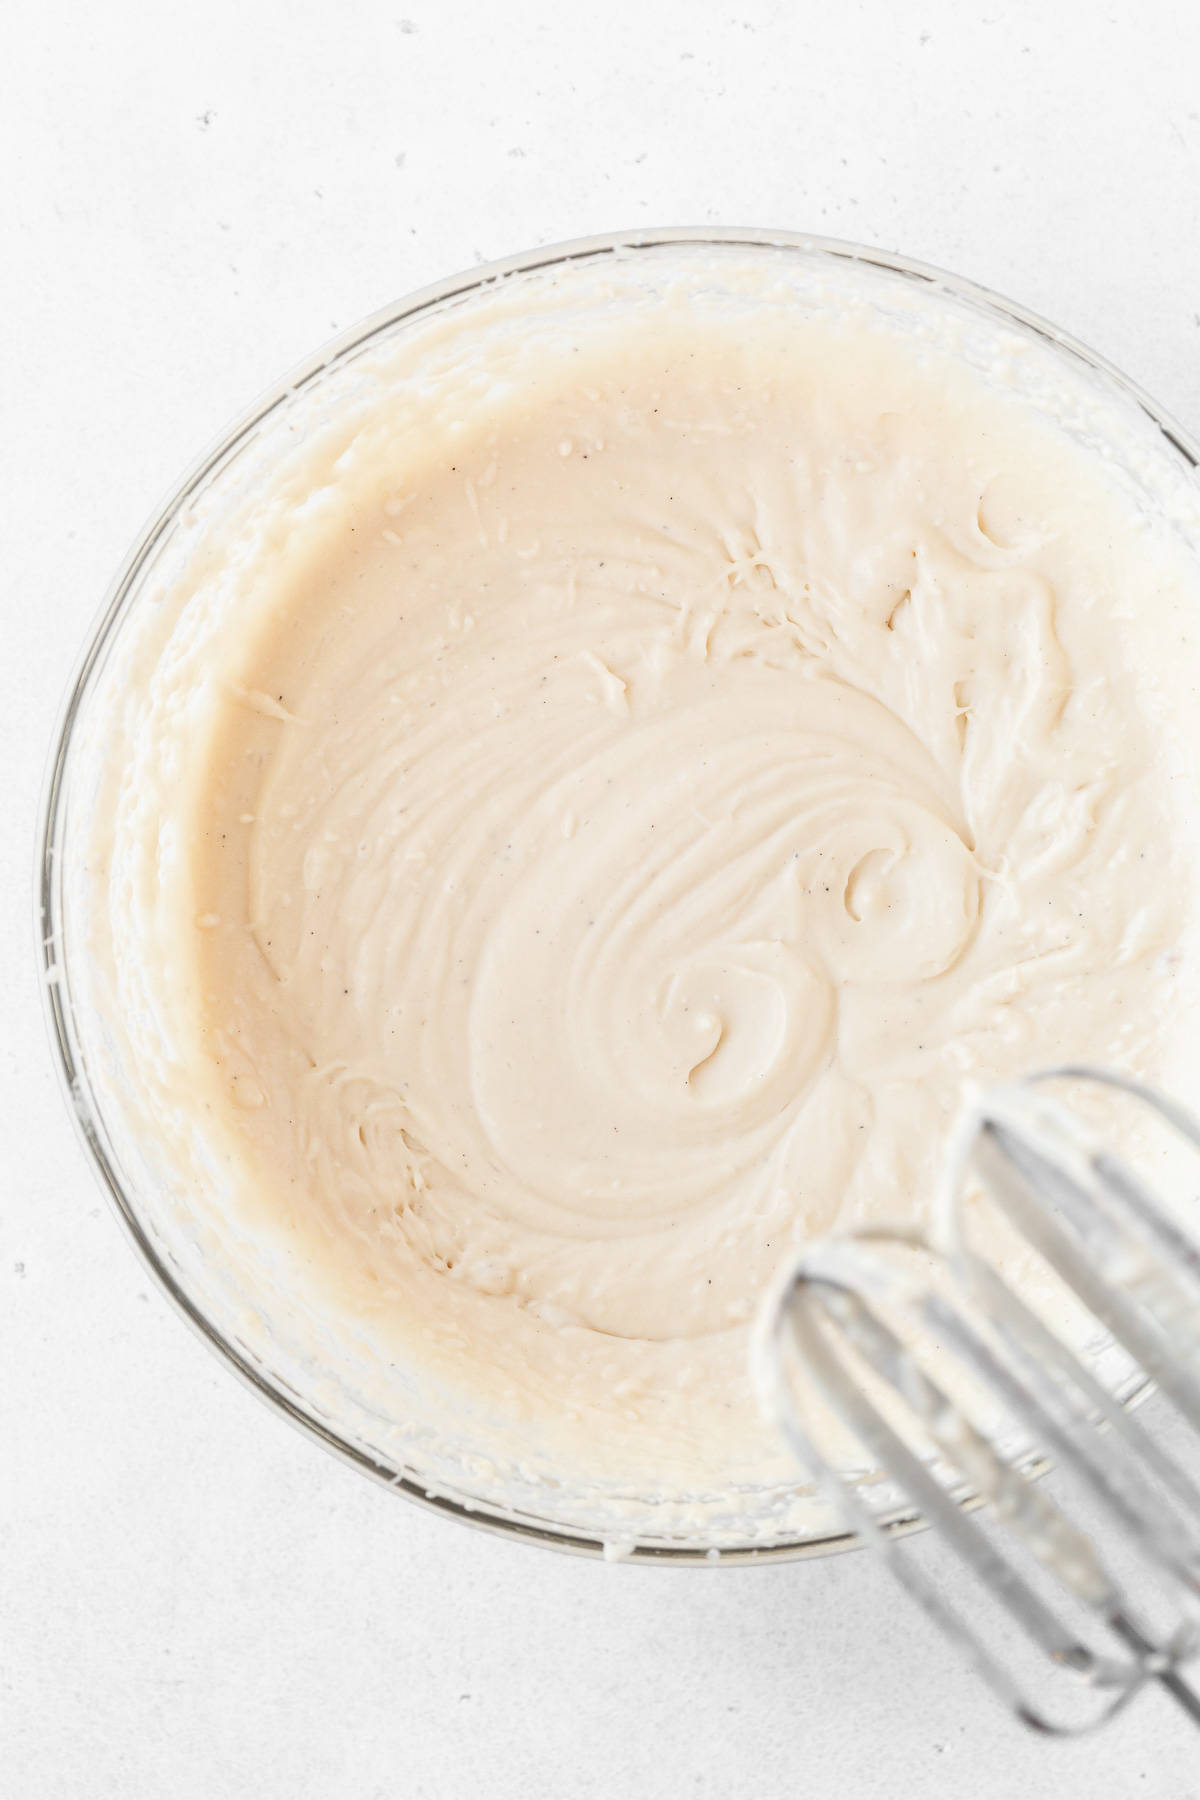 The dairy-free ice cream base in a glass mixing bowl before freezing.